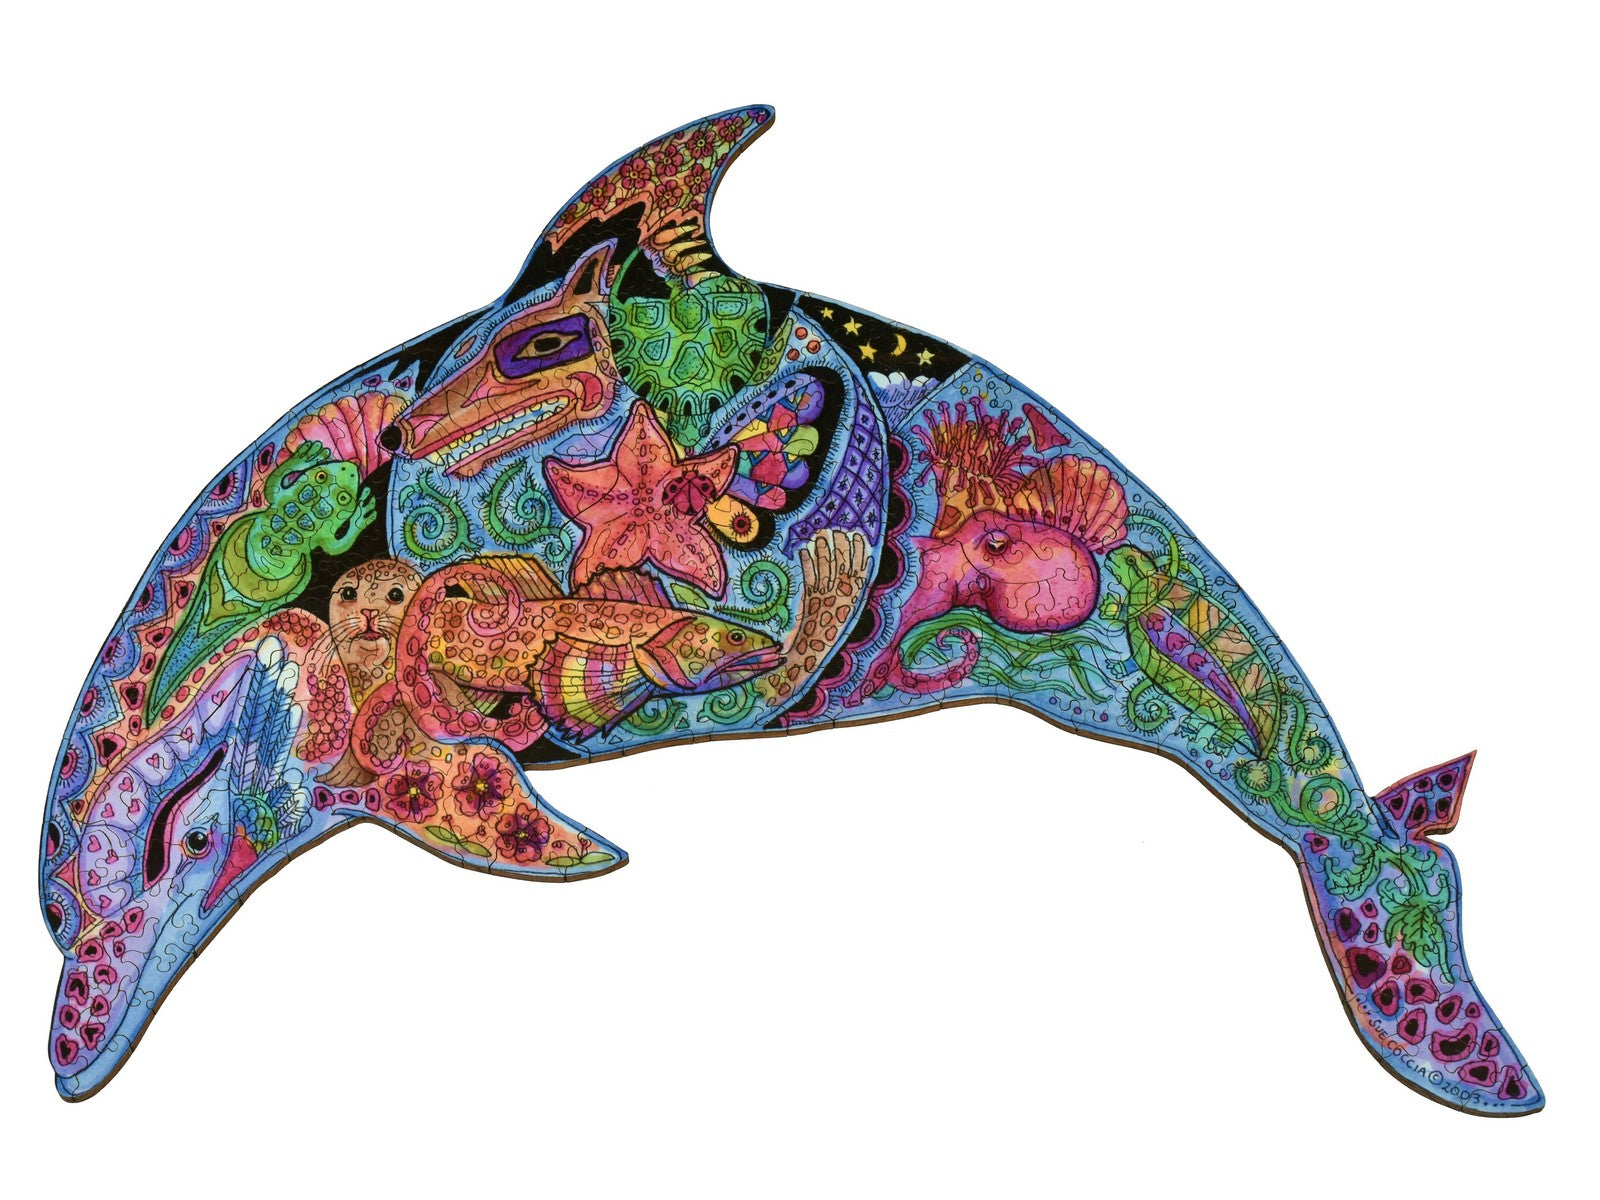 The front of the puzzle, Dolphin, which shows various ocean plants and animals, in the shape of a dolphin.